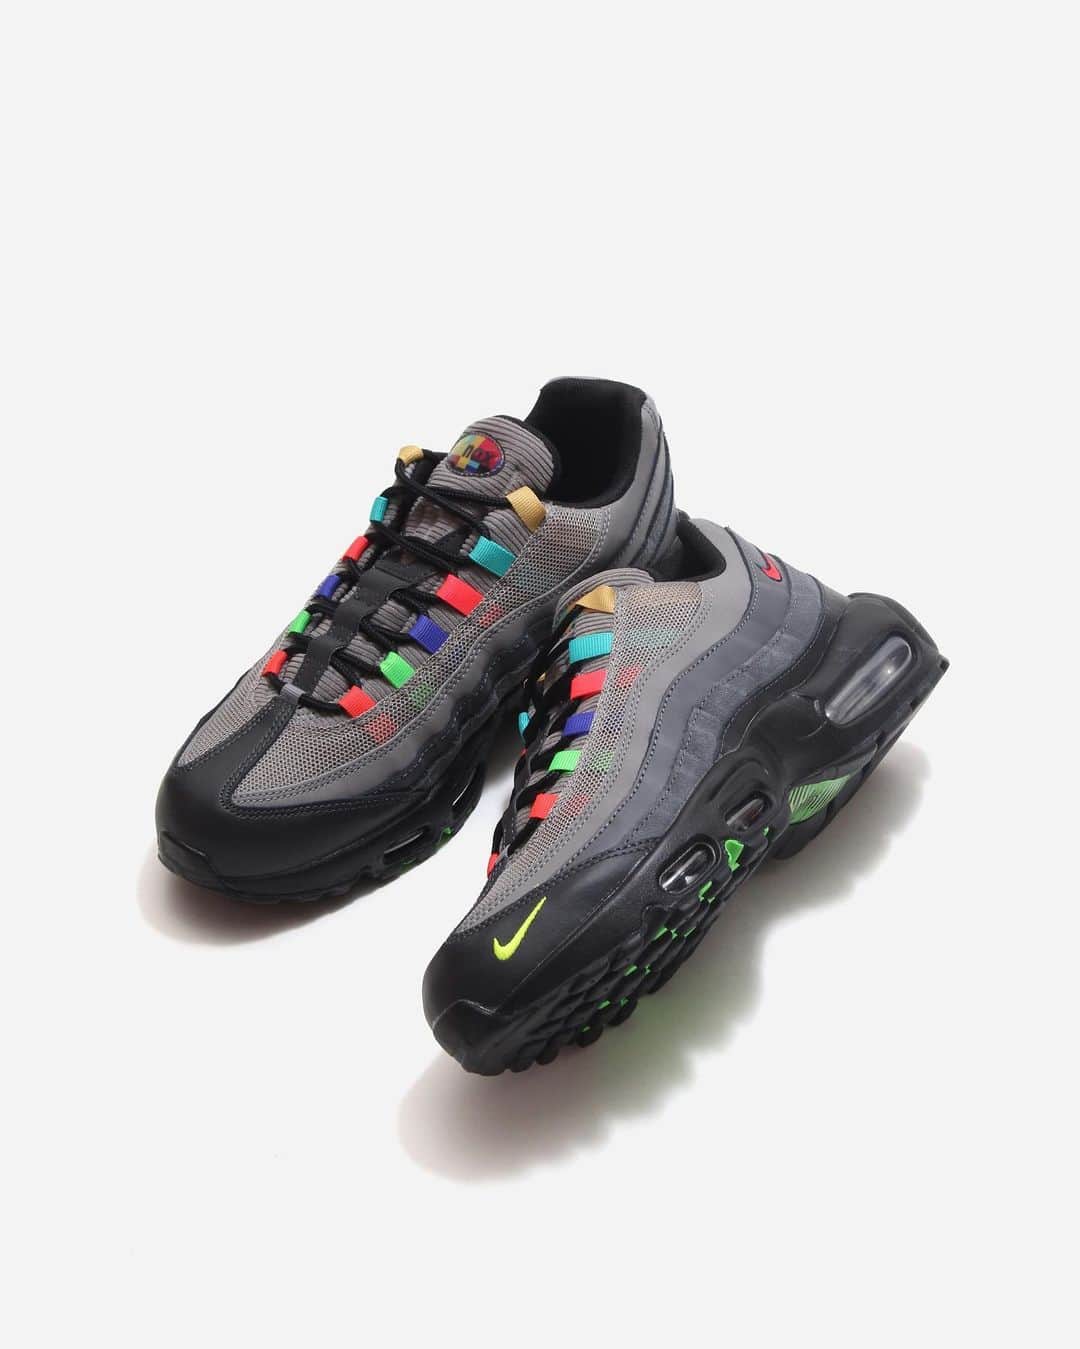 A+Sのインスタグラム：「in stock now﻿ ﻿ ■NIKE AIR MAX 95 SE﻿ COLOR : LIGHT CHARCOAL/UNIVERSITY RED-BLACK﻿ SIZE : 26.0cm-29.0cm 30.0cm ﻿ PRICE : ¥17,000 (+TAX)﻿ ﻿ AIR MAXのすべてを称えよう。﻿ 人体と定番のトラックスタイルをイメージしたデザインのナイキ エア マックス 95 SEは、抜群の快適性と注目を集める魅力的なスタイルを兼ね備えています。 他の90年代Air Maxアイコンから採用したDNAと素材、カラーを組み合わせ、柔らかいクッショニングで歩きながらAirの進化を称えます。﻿ ﻿ Celebrate all of AIR MAX.﻿ Designed with the image of the human body and classic truck style, the Nike Air Max 95 SE combines outstanding comfort with an attractive style that attracts attention. Combining DNA, materials, and colors from other 90's Air Max icons, the soft cushioning celebrates the evolution of the Air while walking.﻿ ﻿ #a_and_s﻿ #NIKE﻿ #NIKEAIRMAX﻿ #NIKEAIRMAX95﻿ #NIKEAIRMAX95SE」